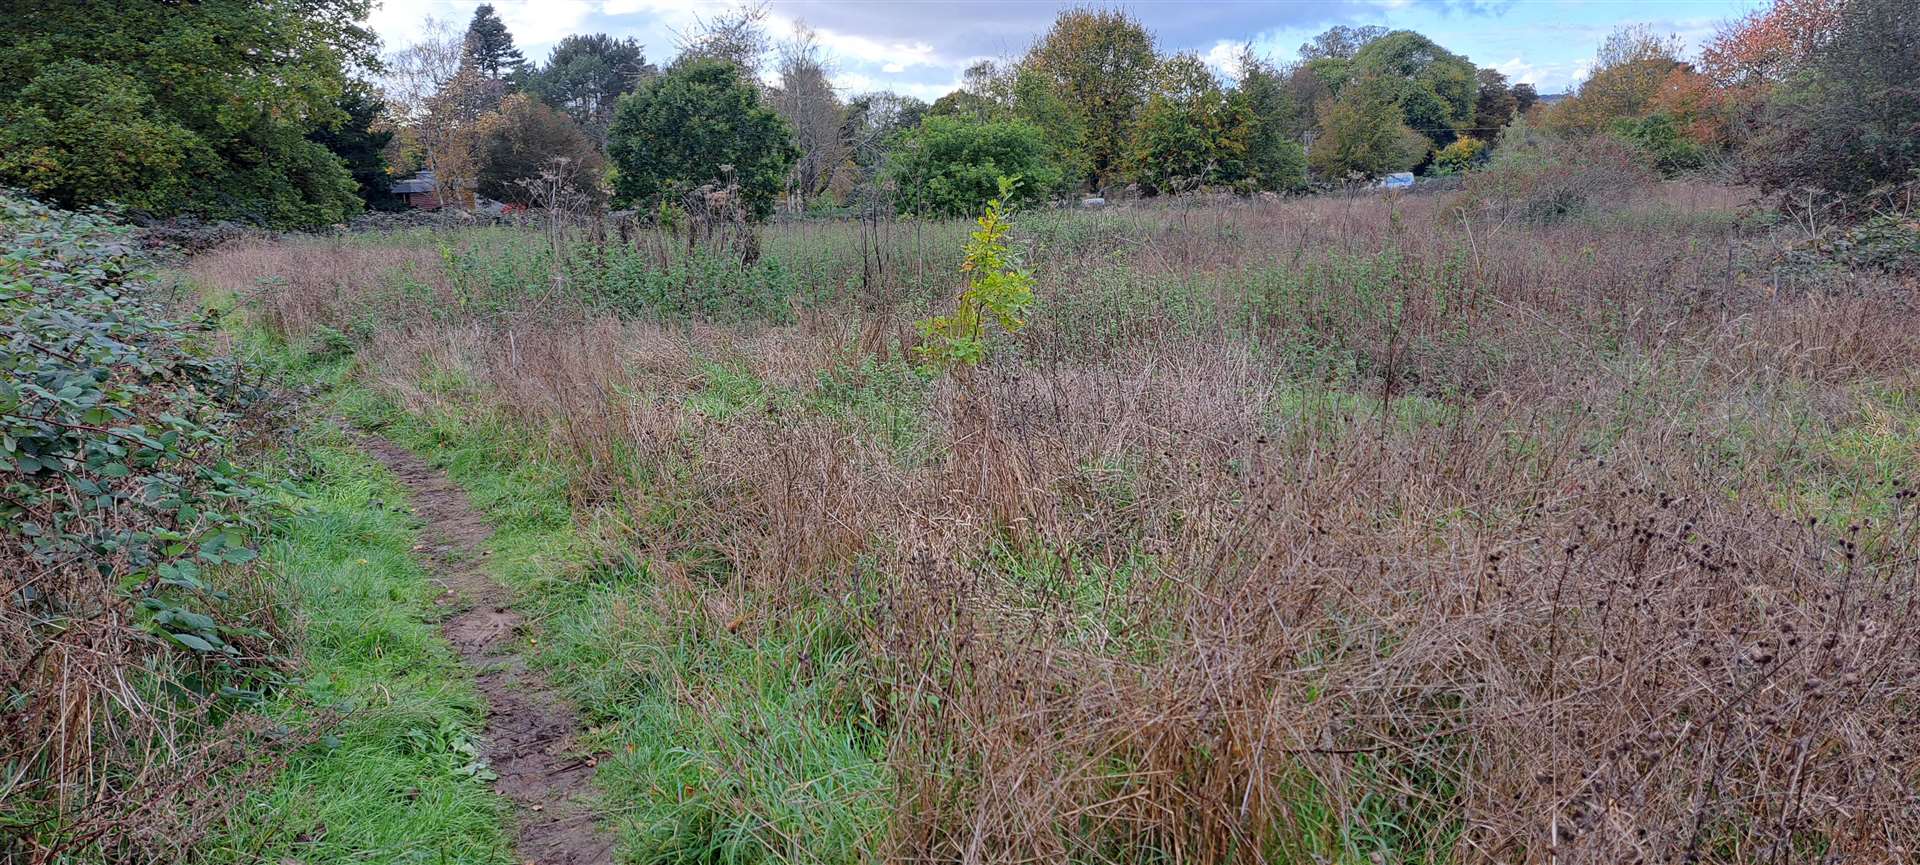 The site earmarked for nine homes